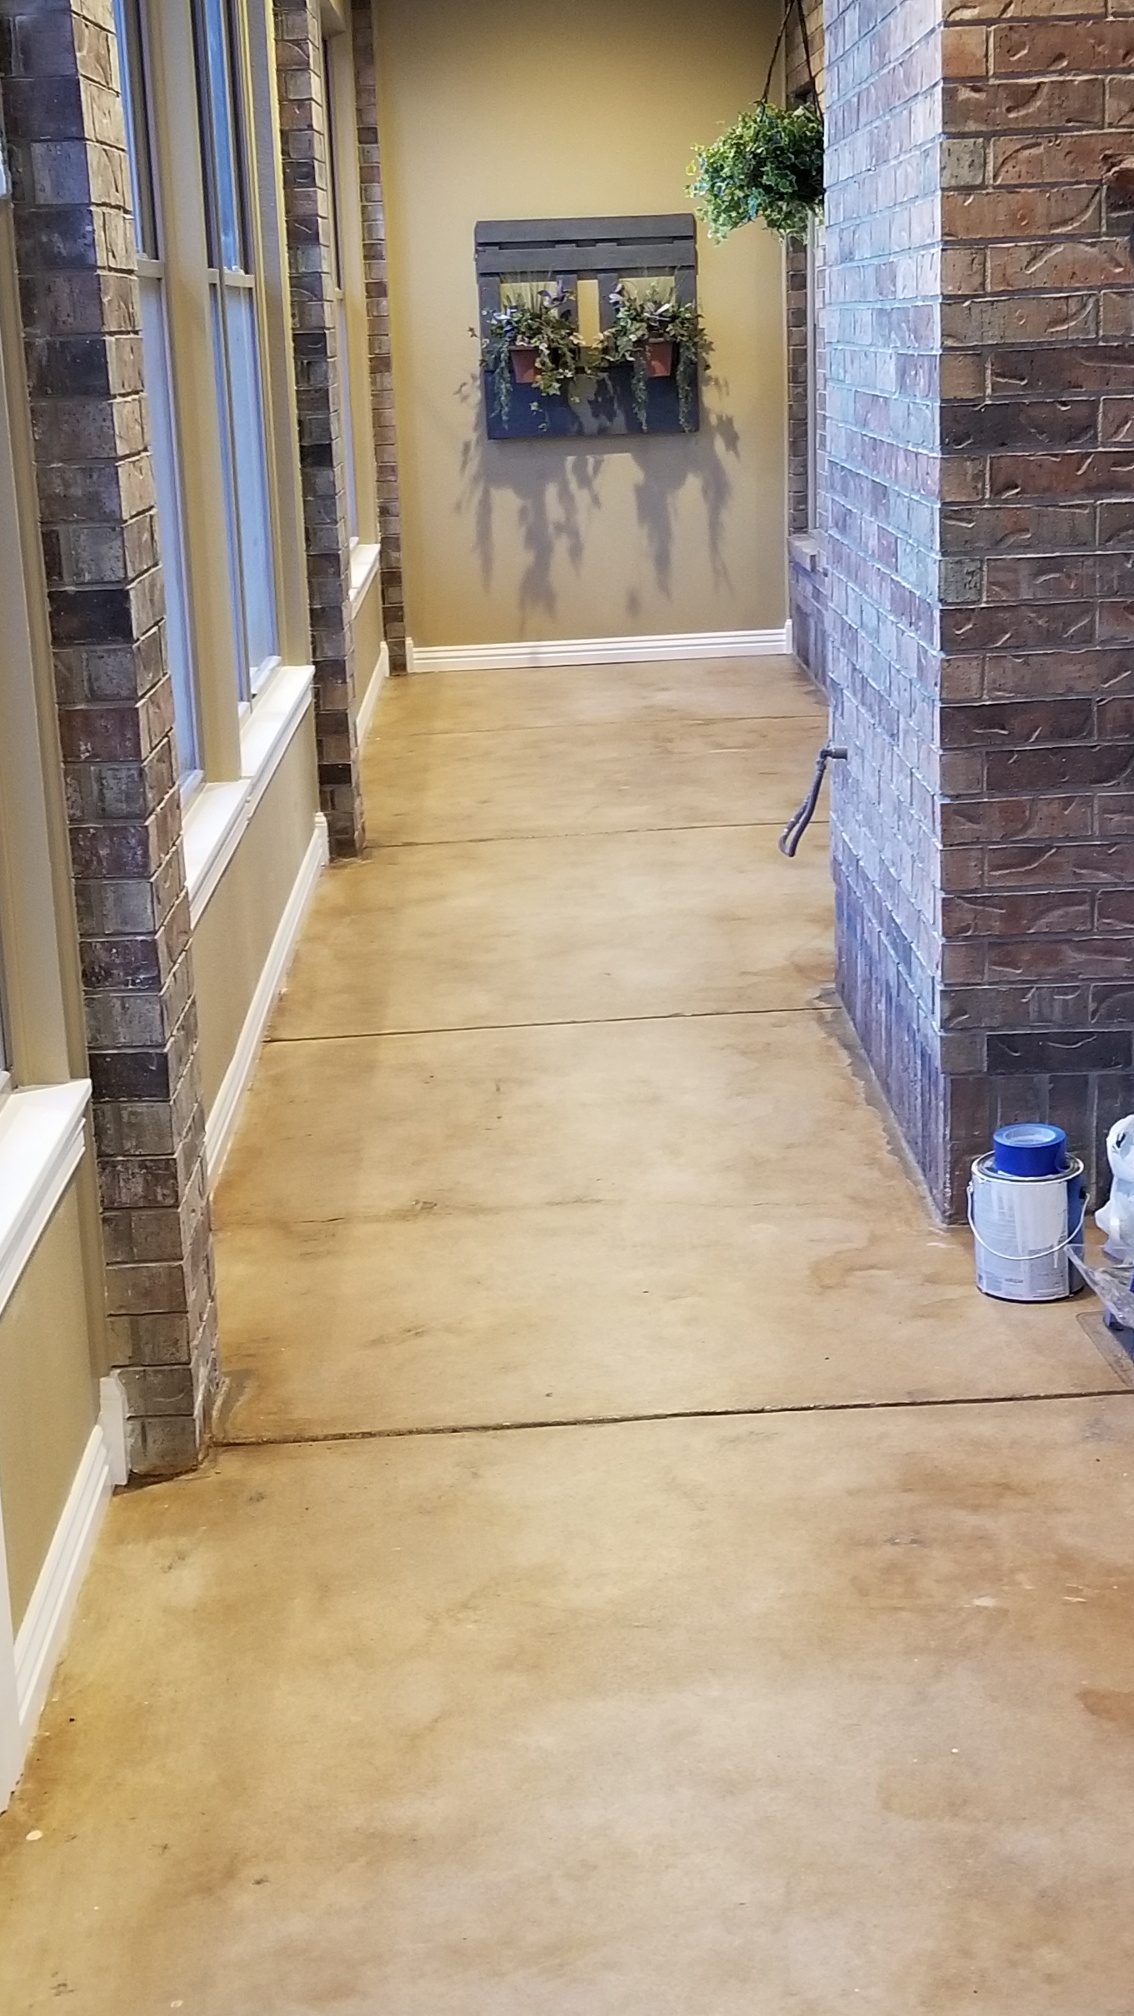 Finish Work of Inside Constructed Sunroom- Stained Concrete Floor